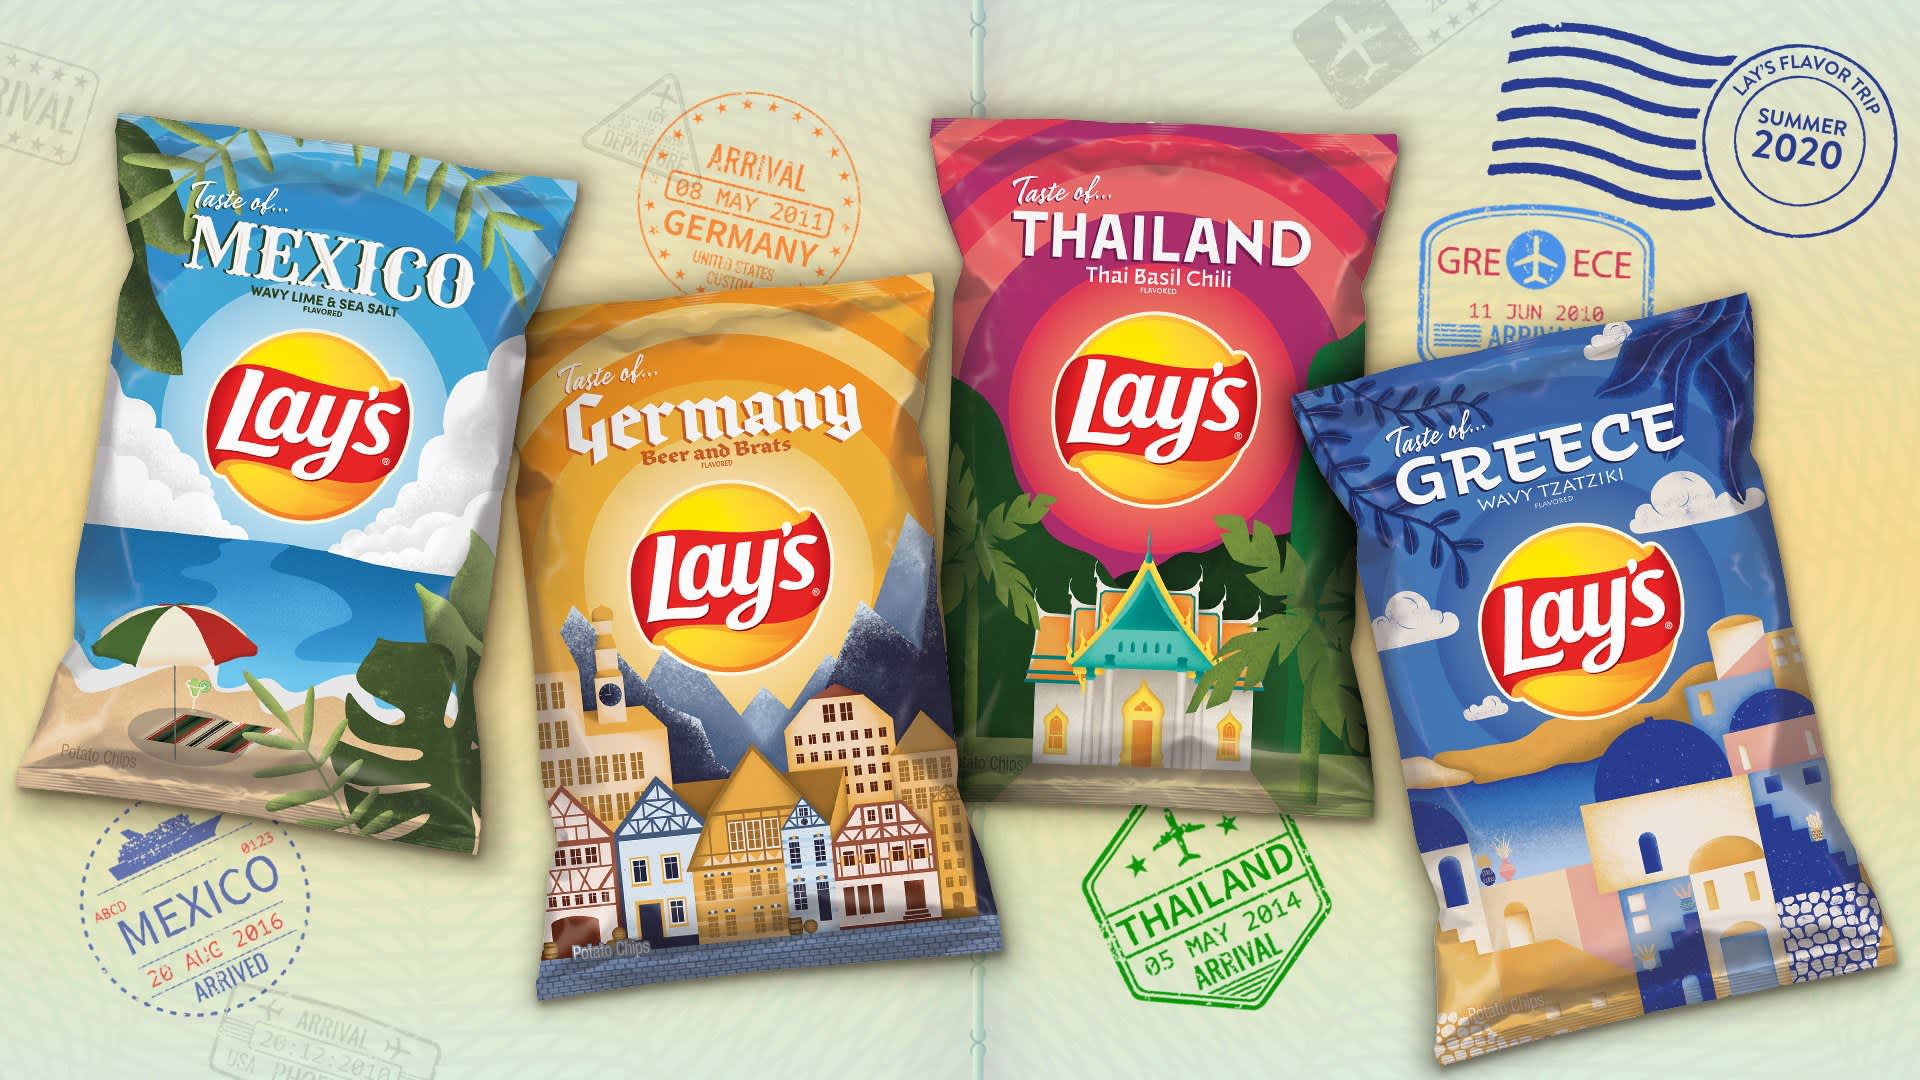 Consumers' interest in adventurous flavors inspired PepsiCo's Frito-Lay to sell top flavors from around the globe in potato chip form this summer.